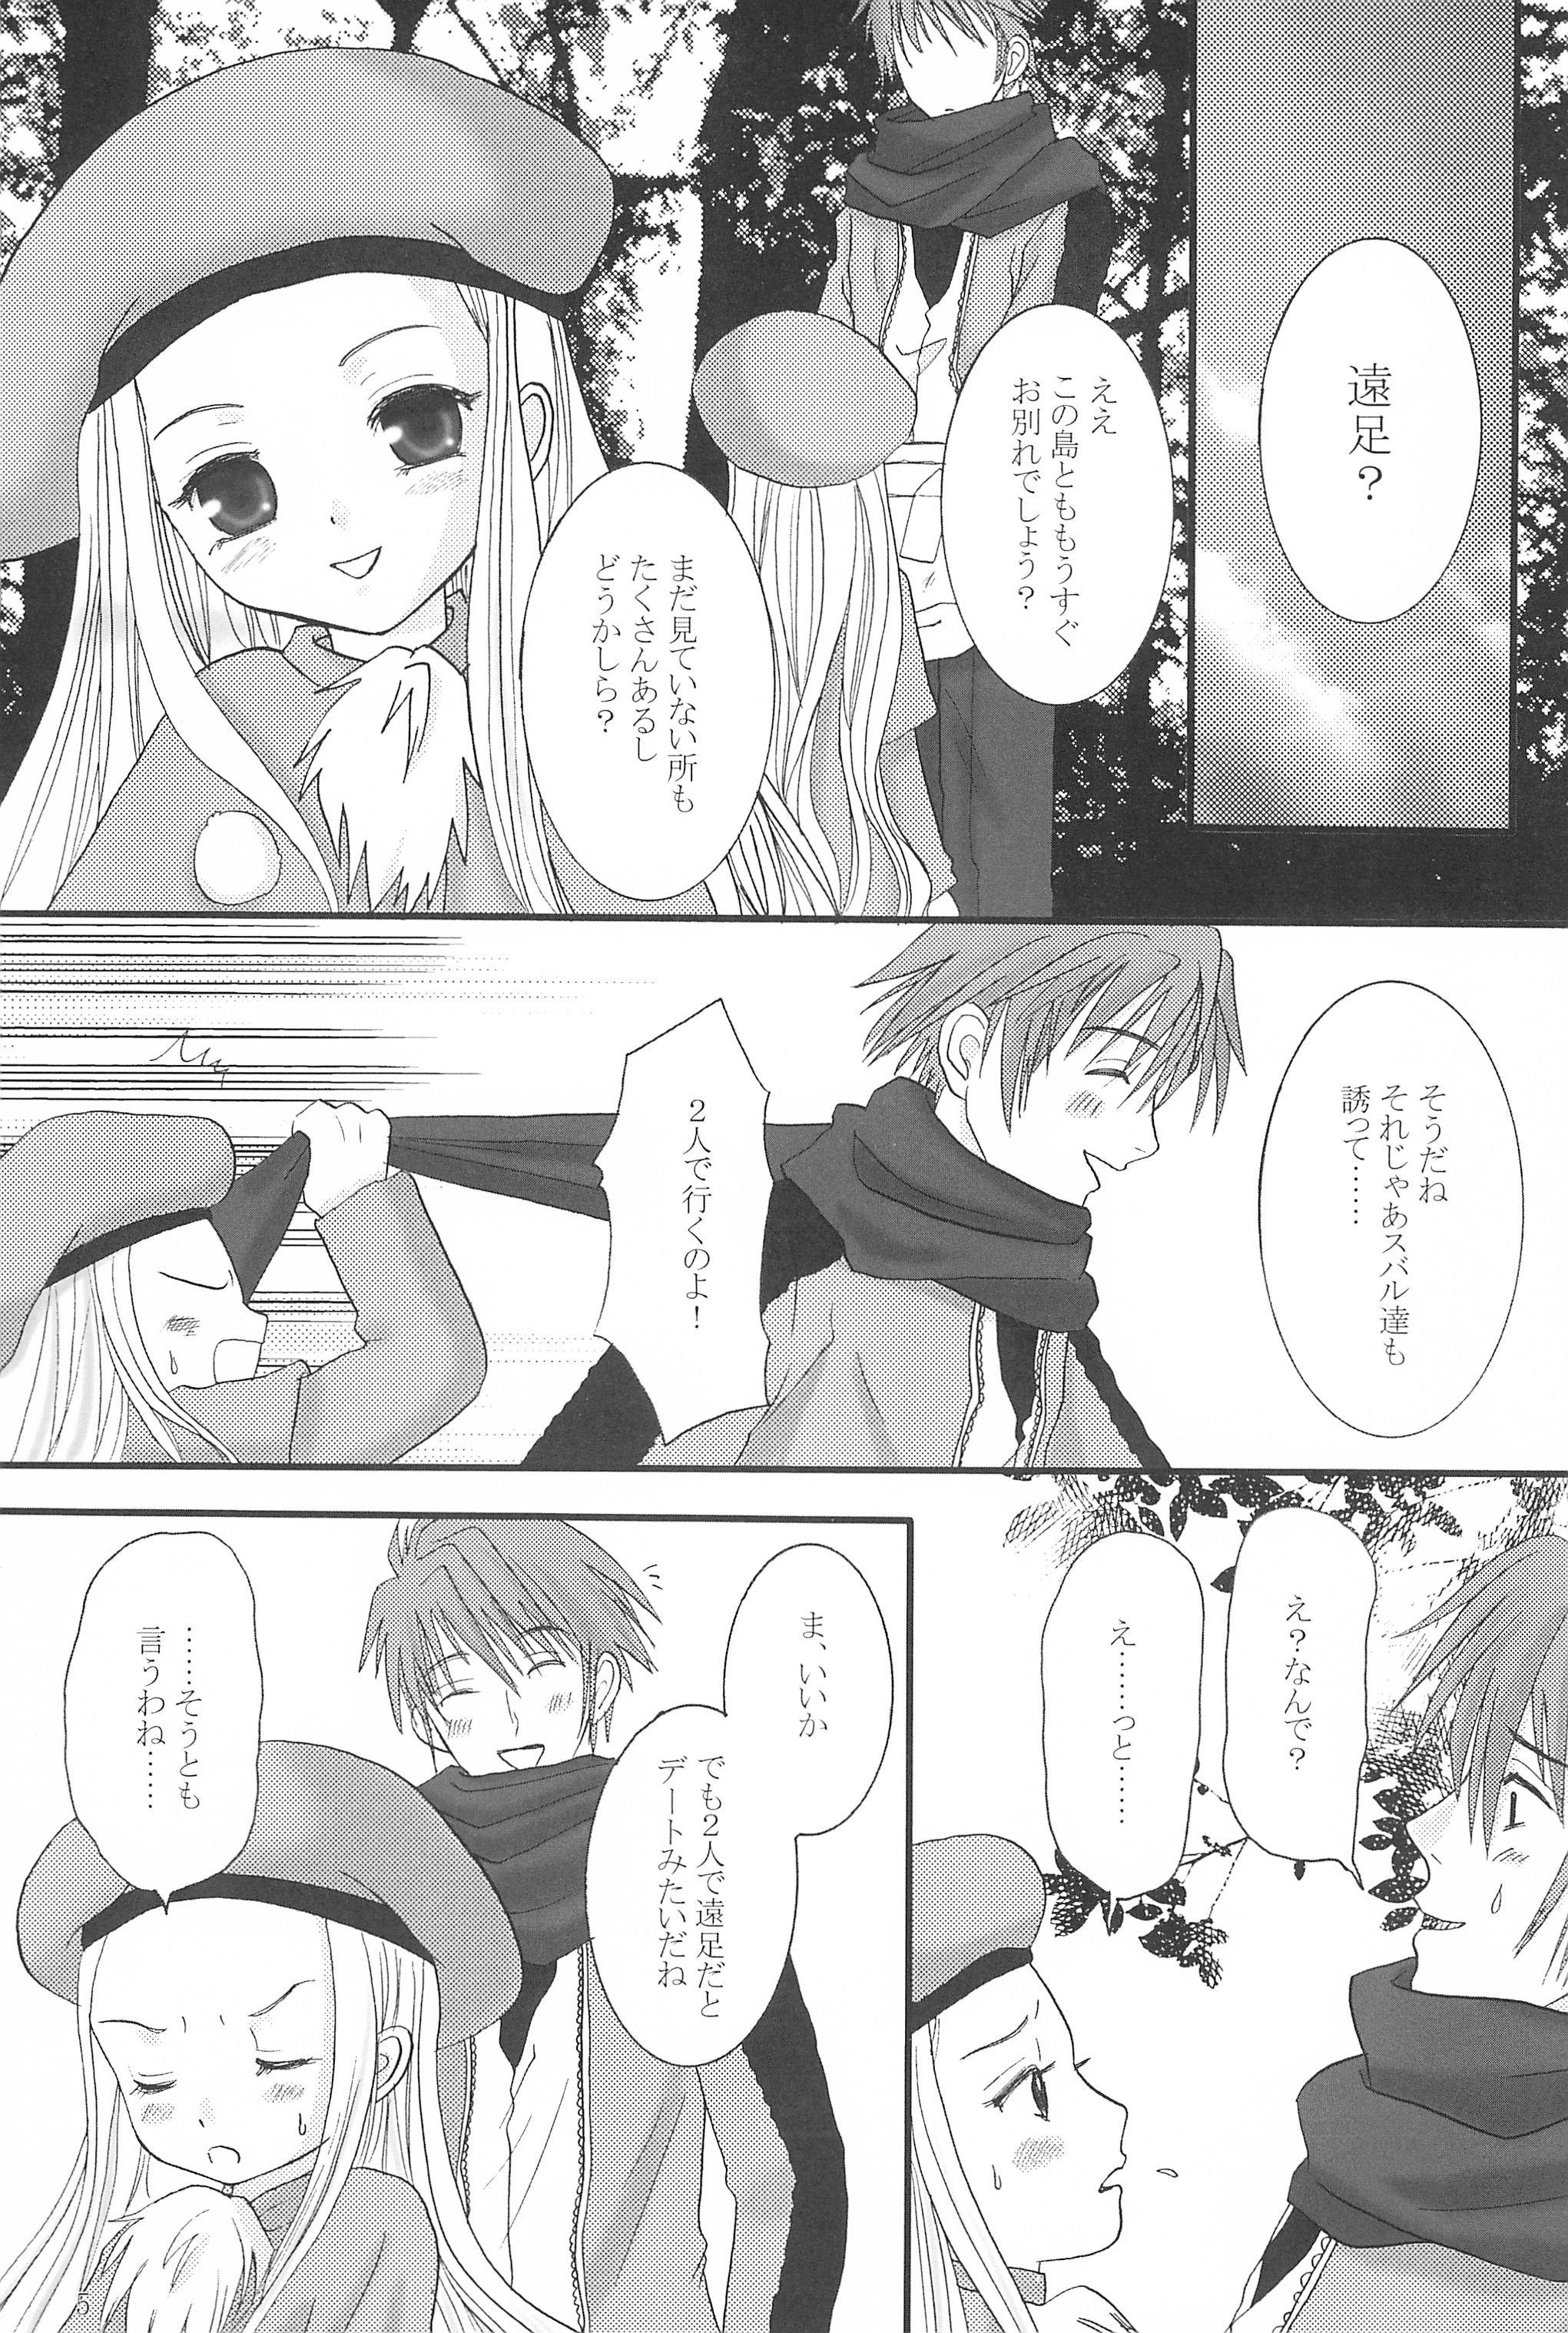 Double Penetration MY SWEET STRAWBERRY - Summon night Missionary Porn - Page 5